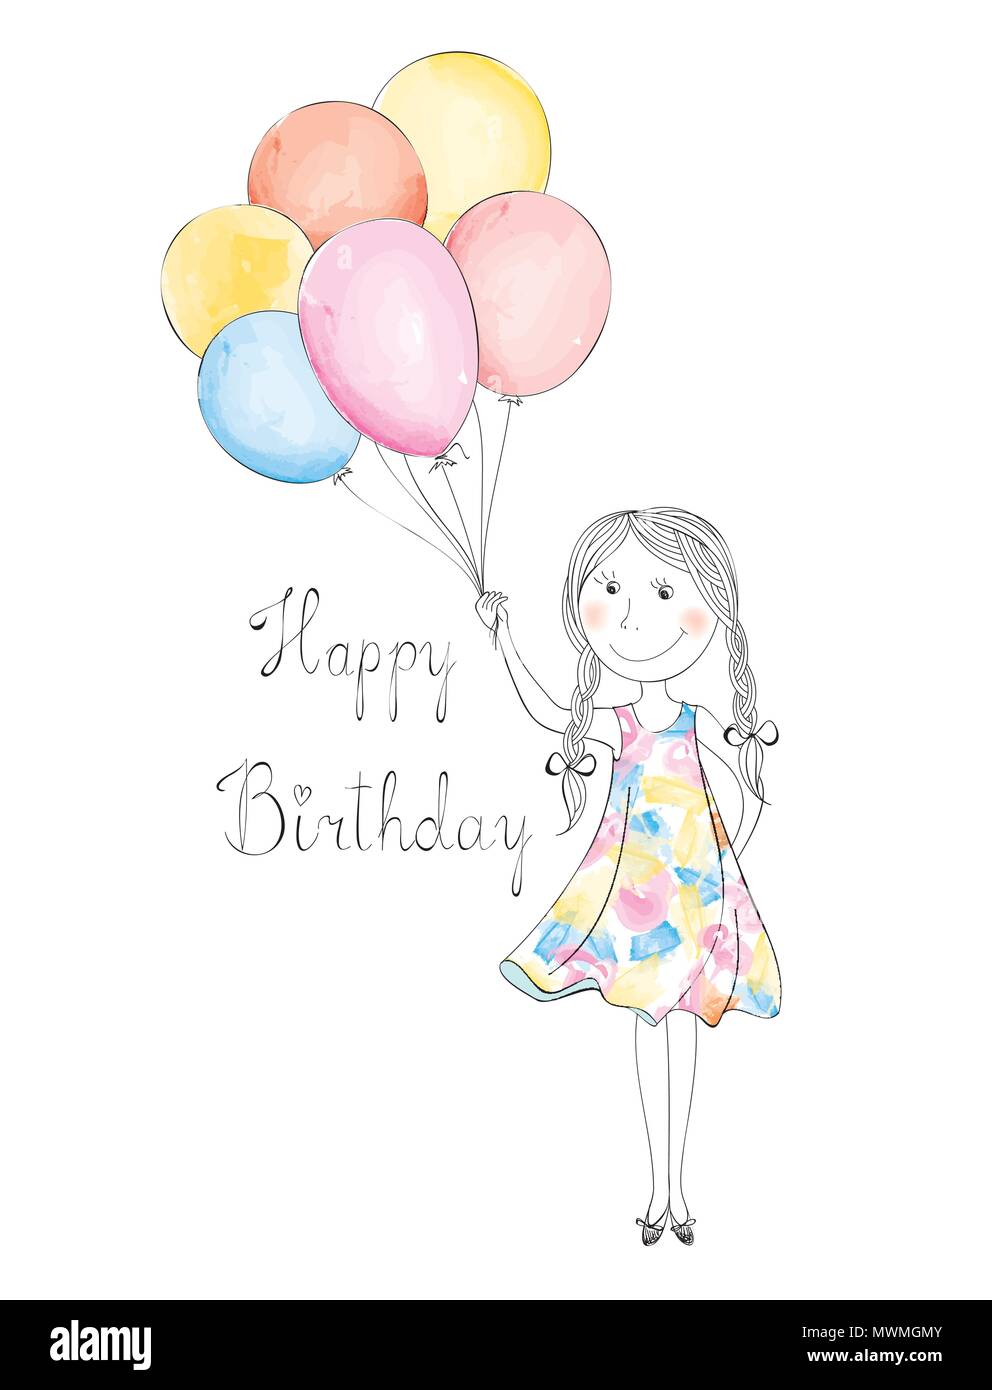 Flower Drawing Birthday Cards  Templates  Zazzle